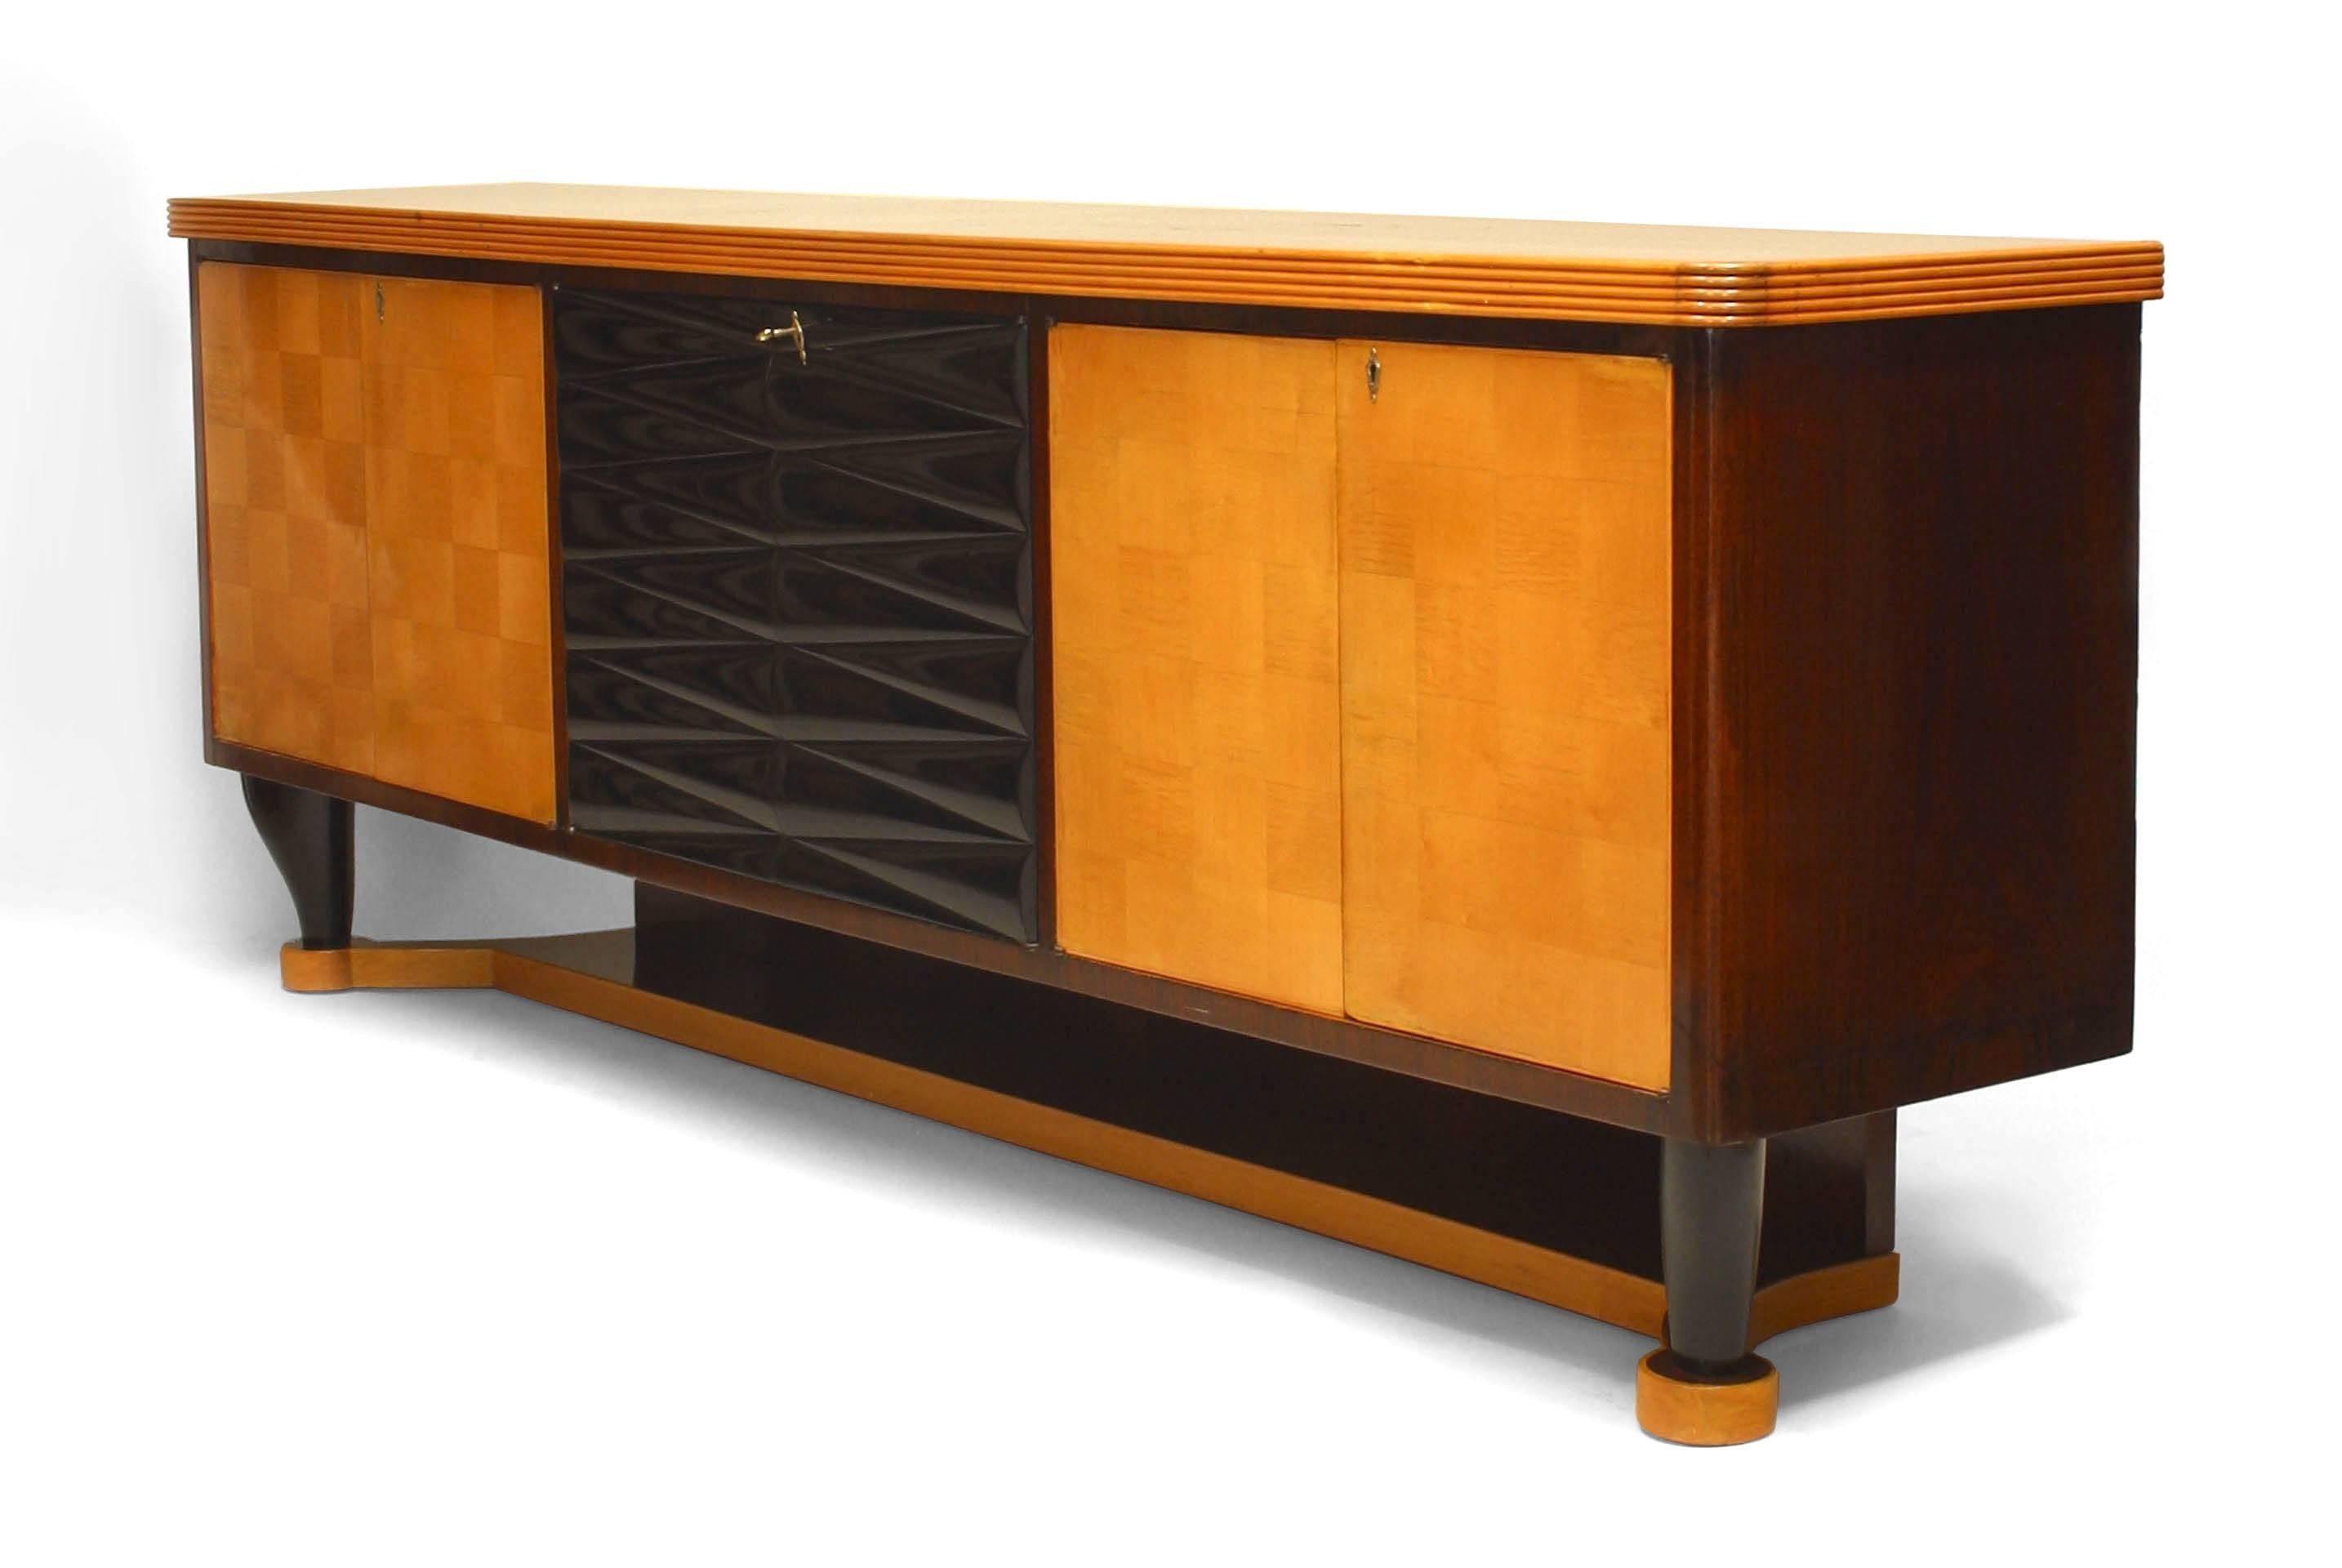 Italian mid-century (1940s) mahogany sideboard with 4 maple parquetry doors centering a Pair of ebonized doors and supported on 4 ebonized legs over a platform base (Attributed to VITTORIO DASSI).
   